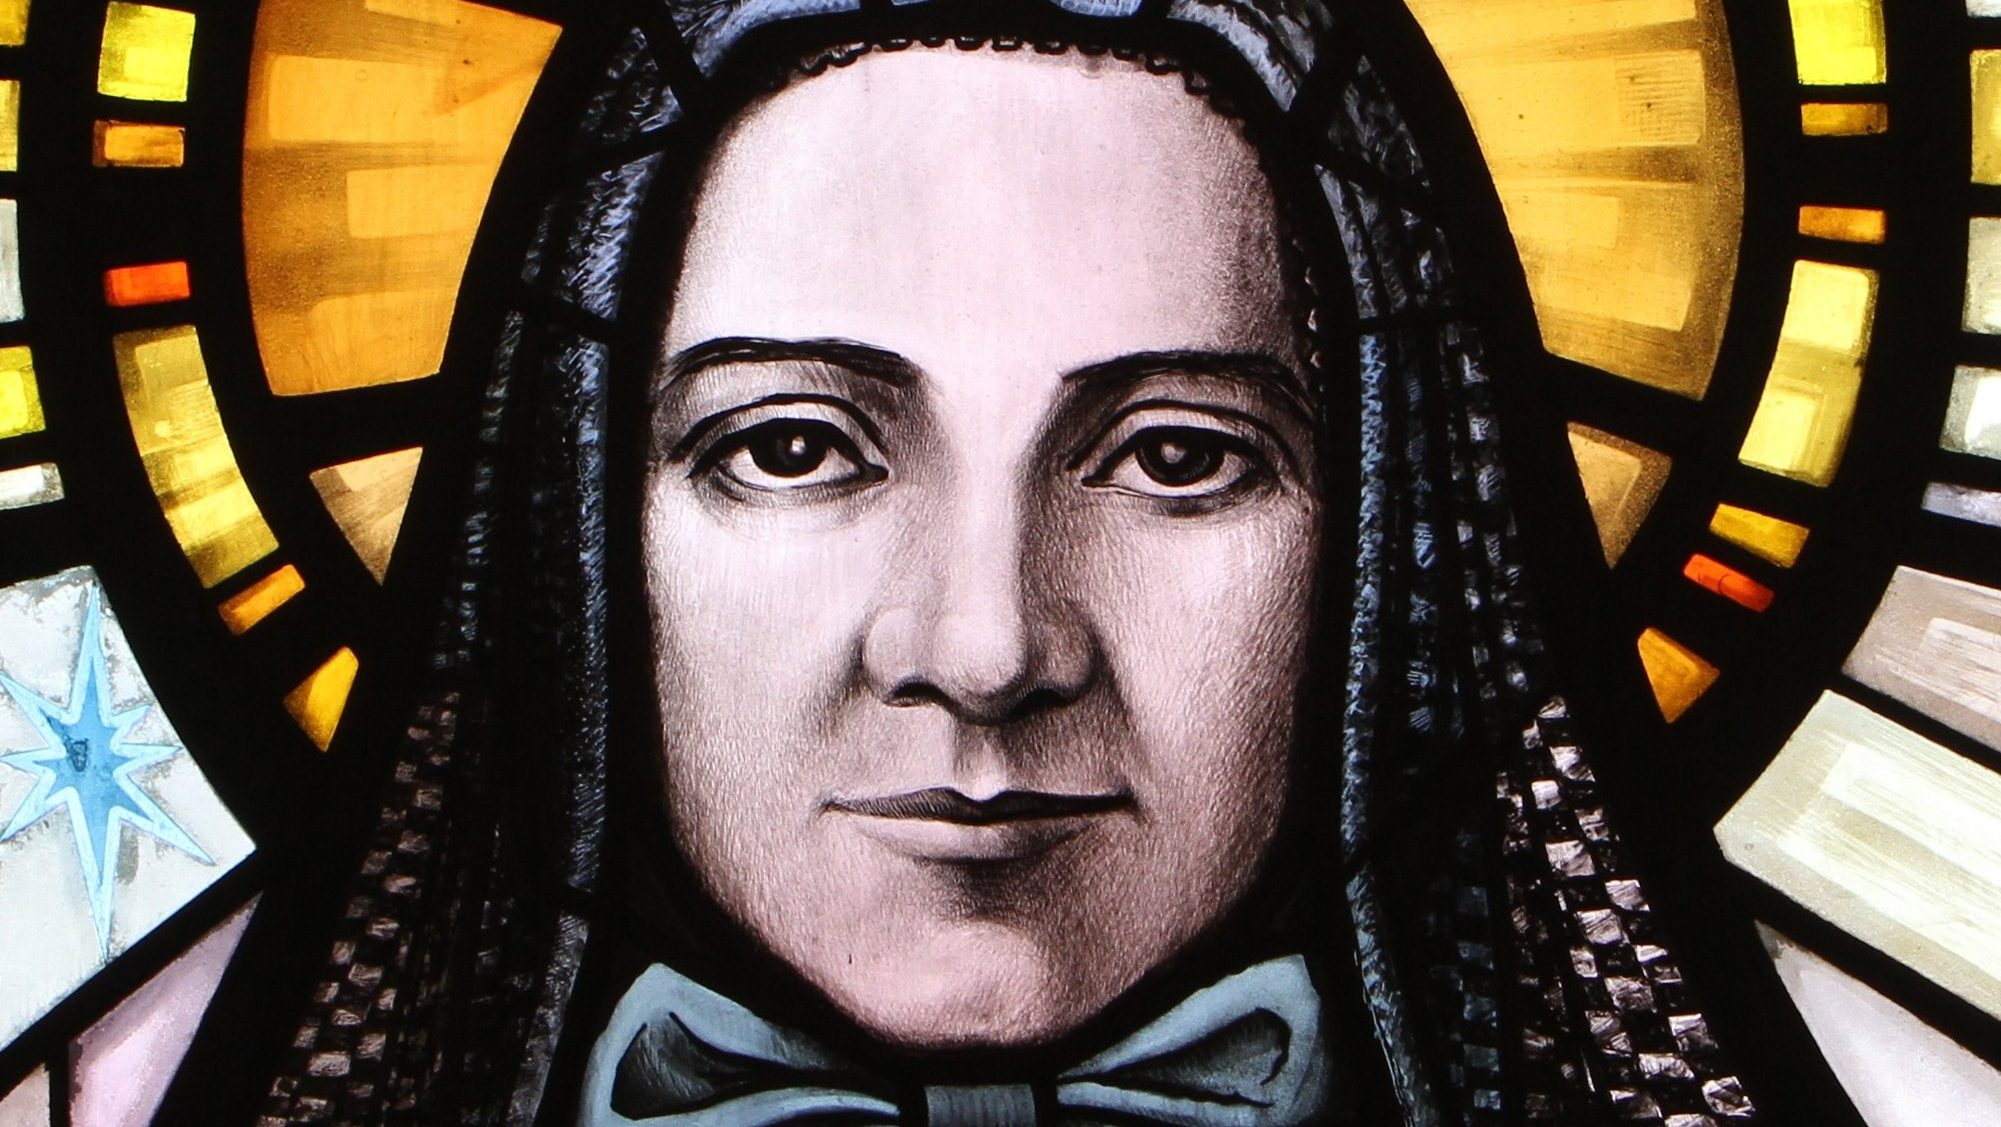 Colorado observes its first Cabrini Day named for patron saint of